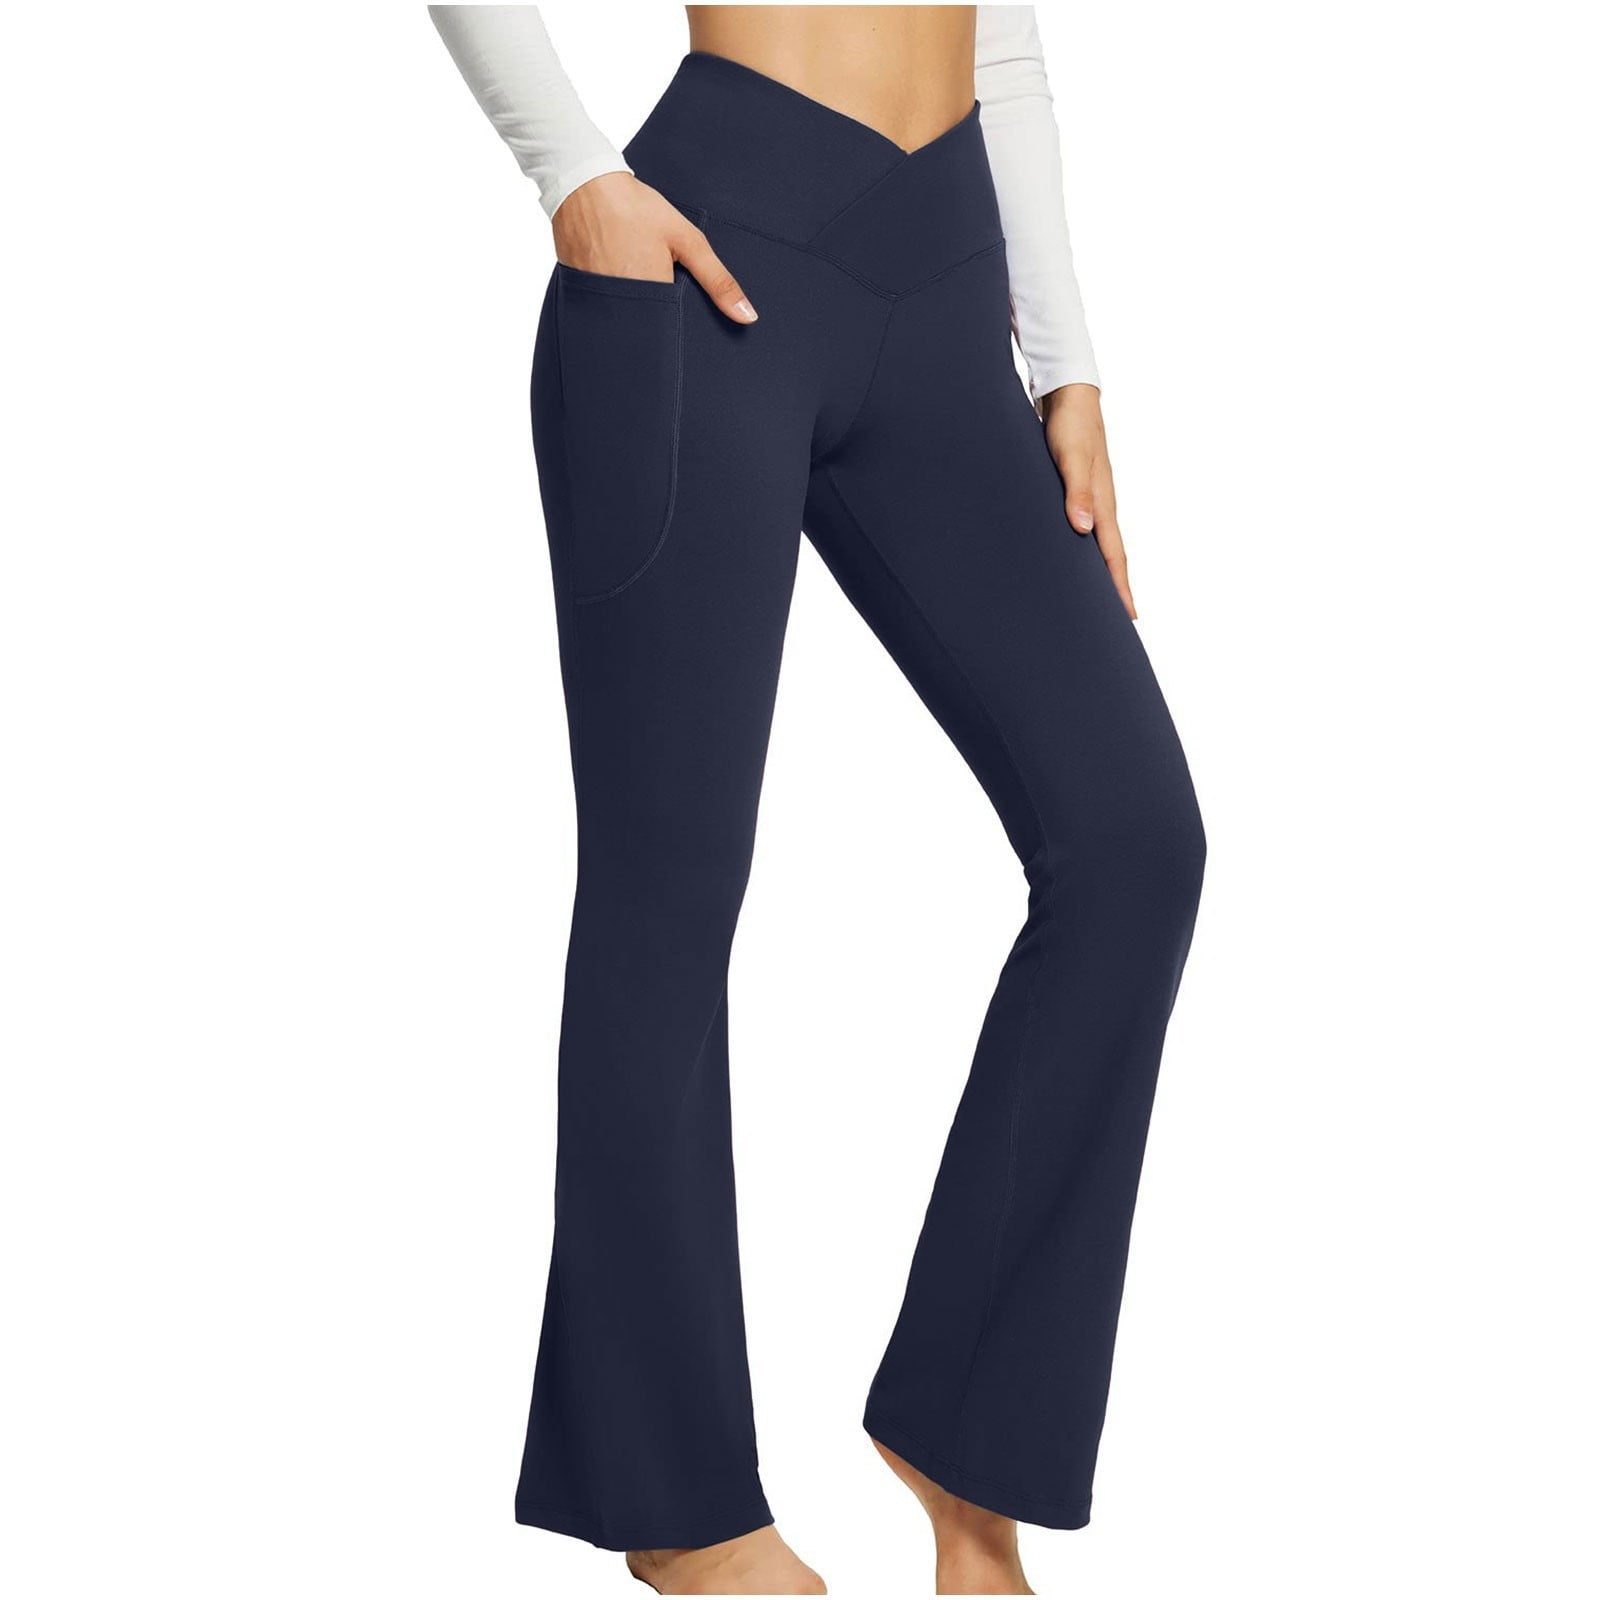 Holiday Clearance! Women's Pants, Flare Leggings for Women